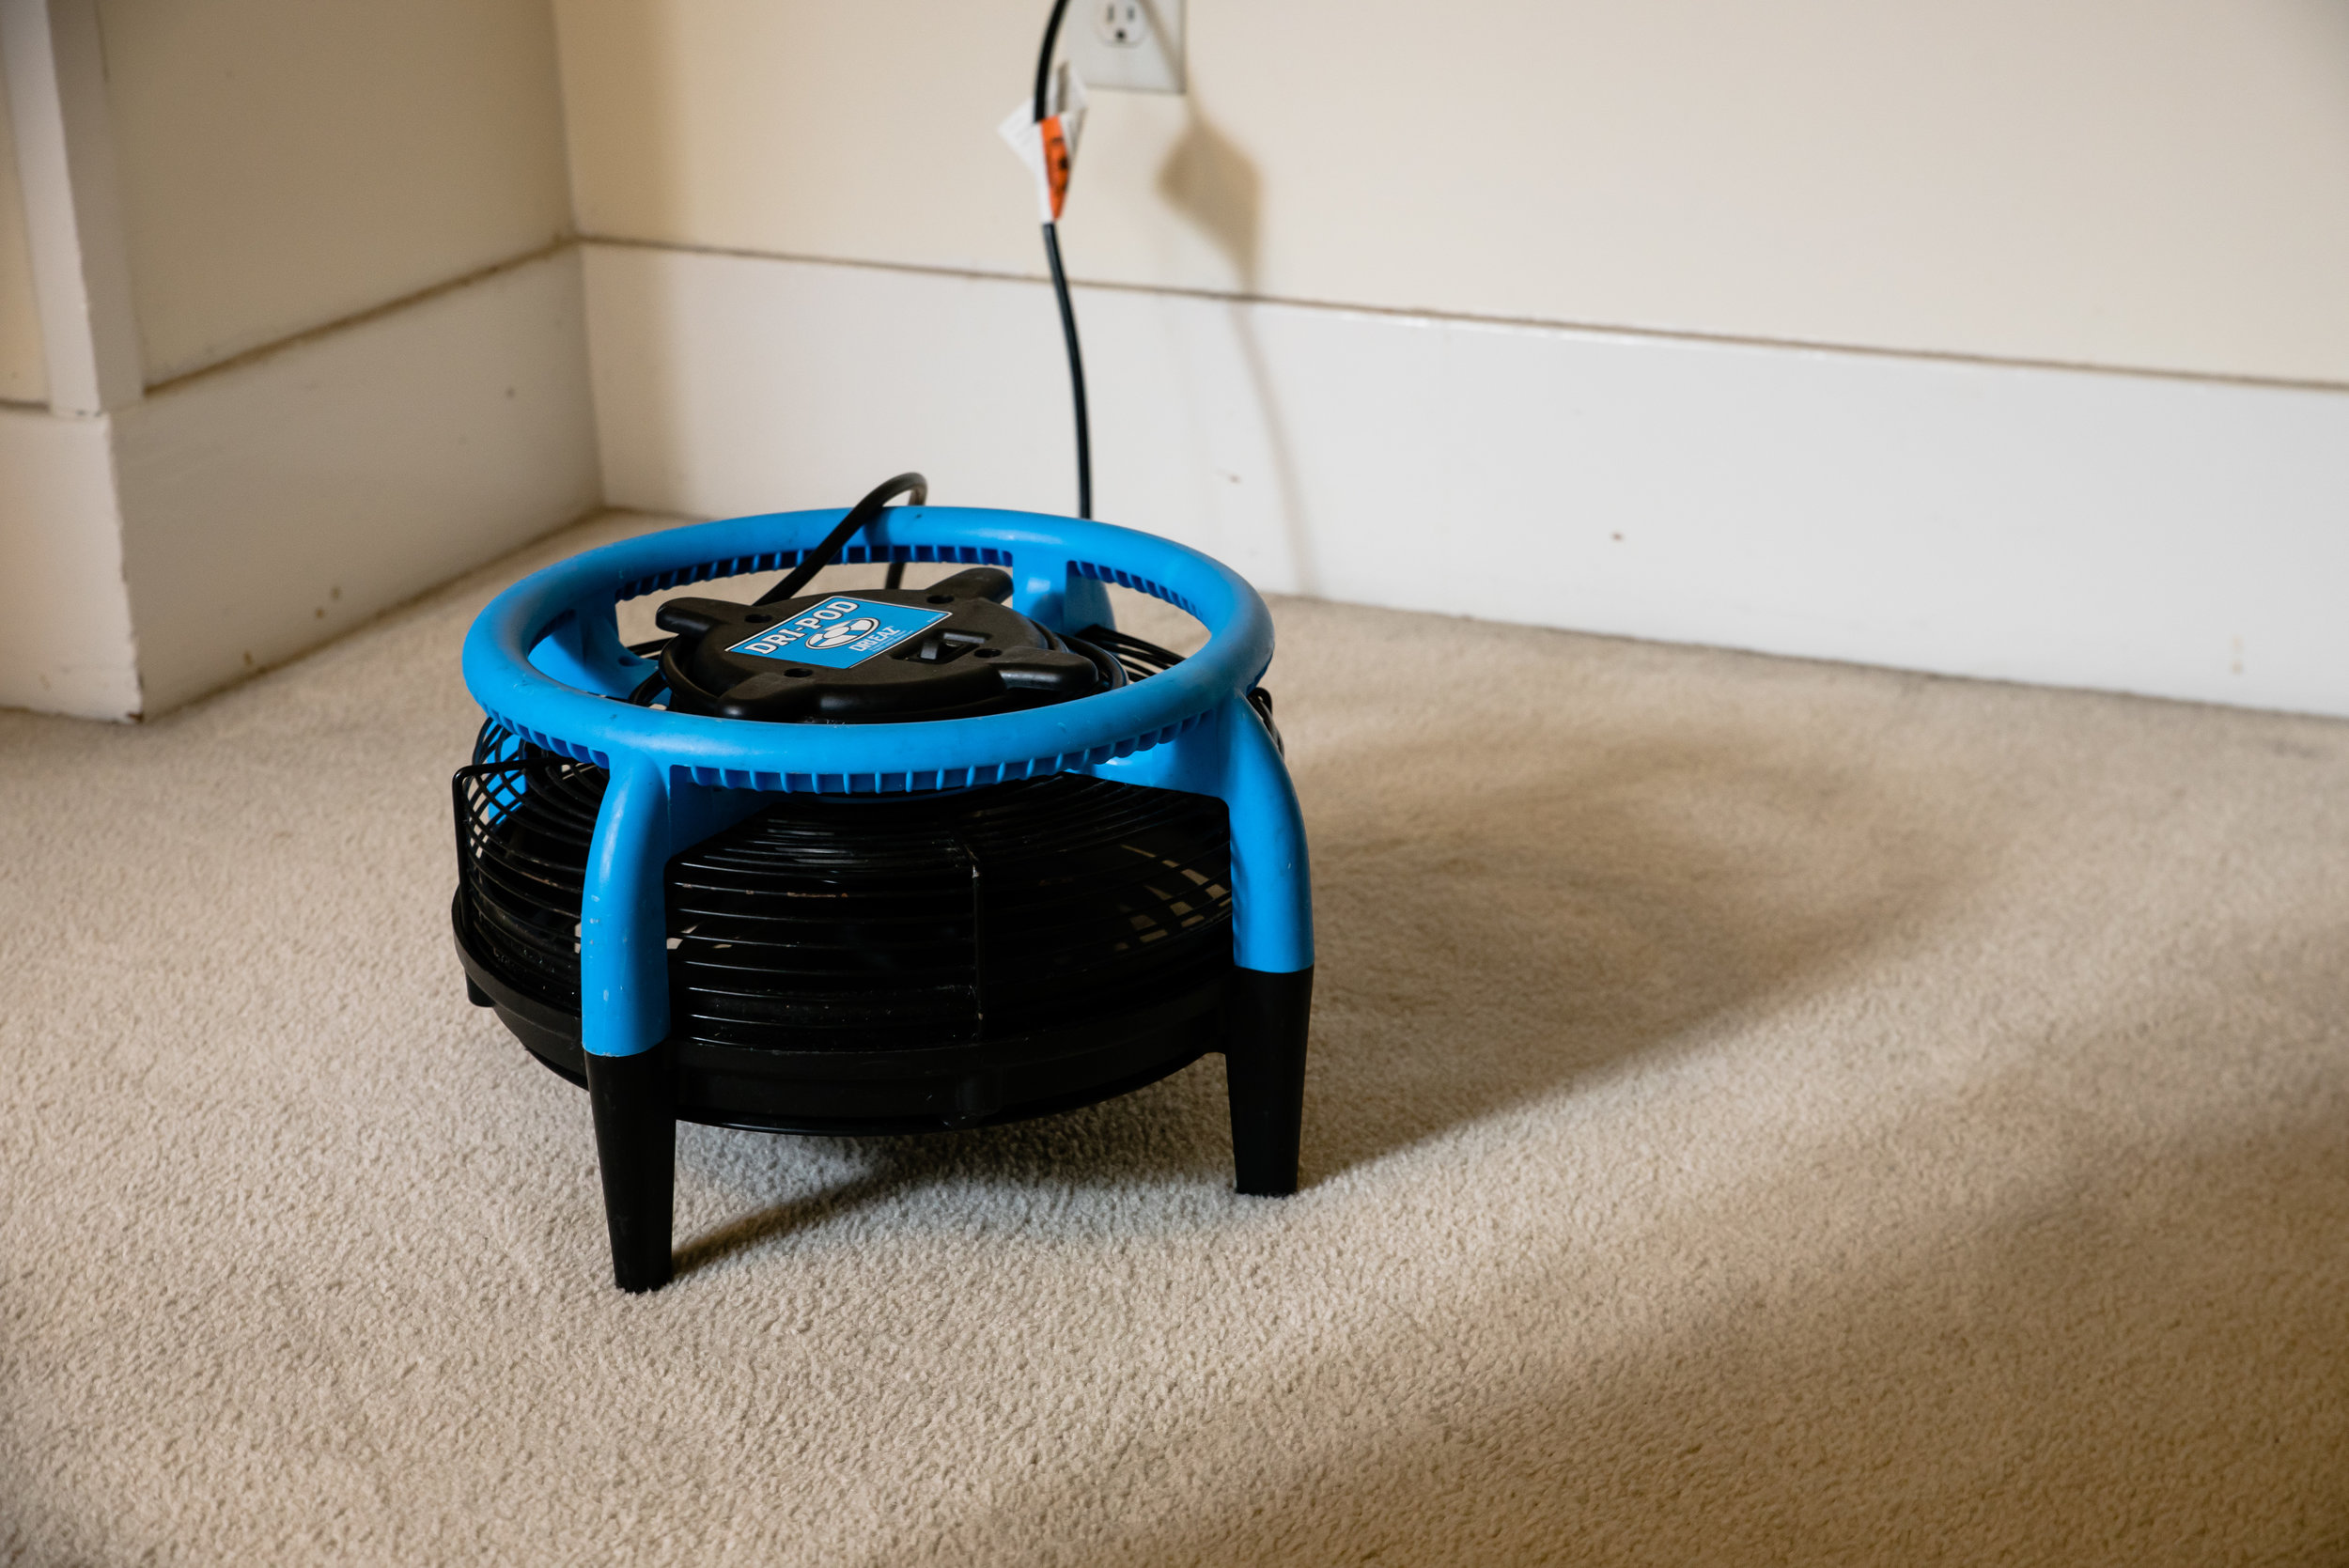 Does carpet dry faster in warm weather? — Sno-King Carpet